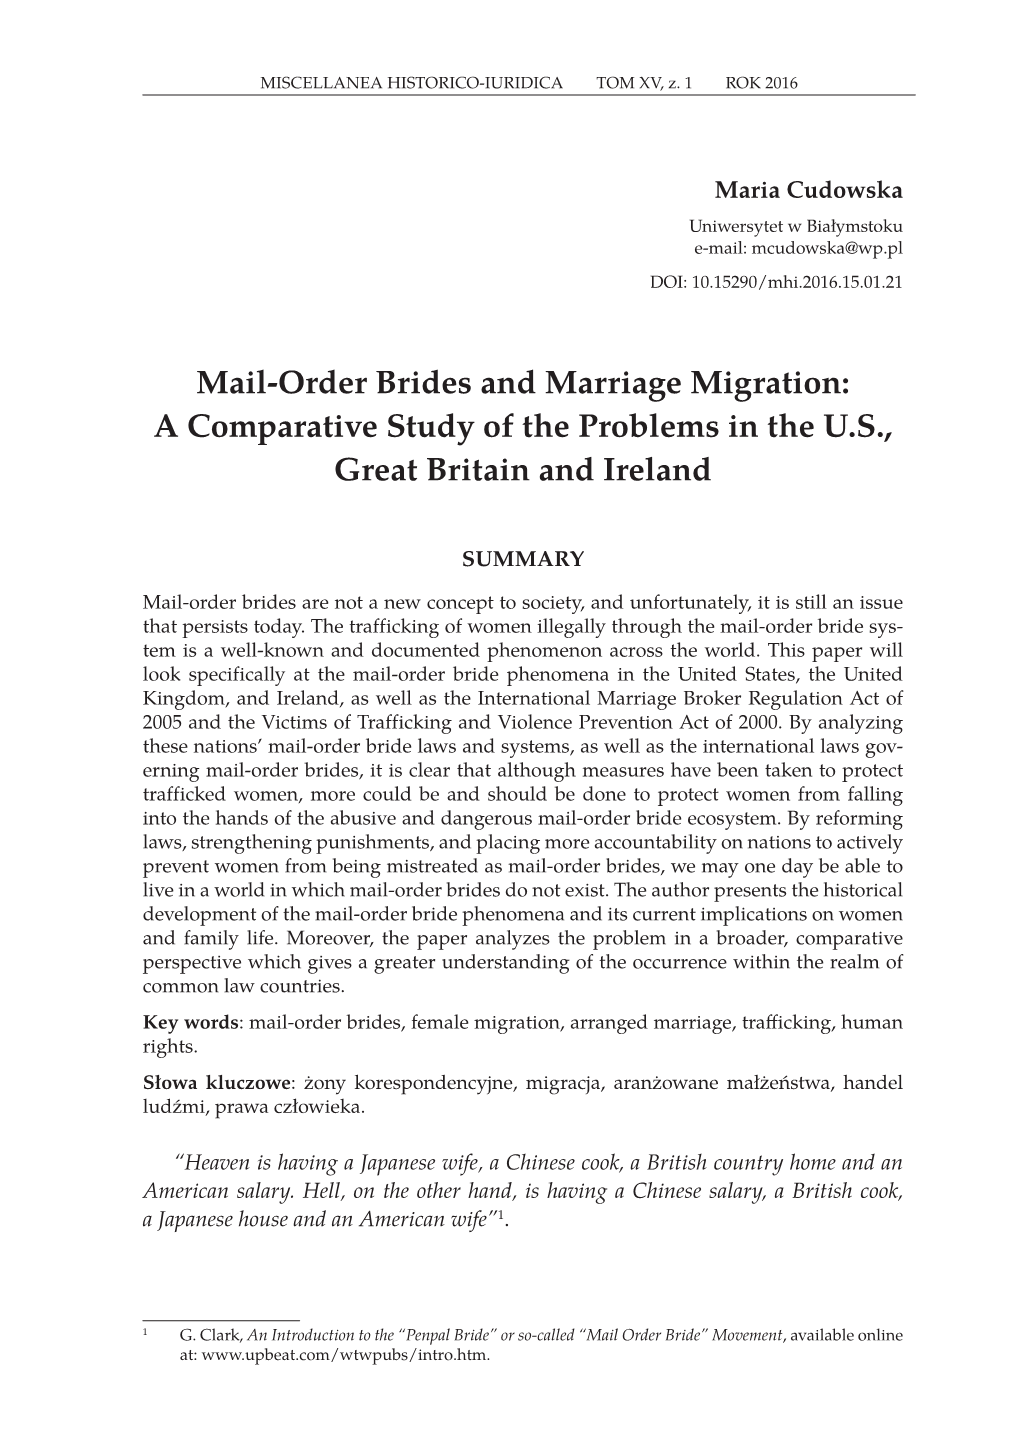 Mail-Order Brides and Marriage Migration: a Comparative Study of the Problems in the U.S., Great Britain and Ireland